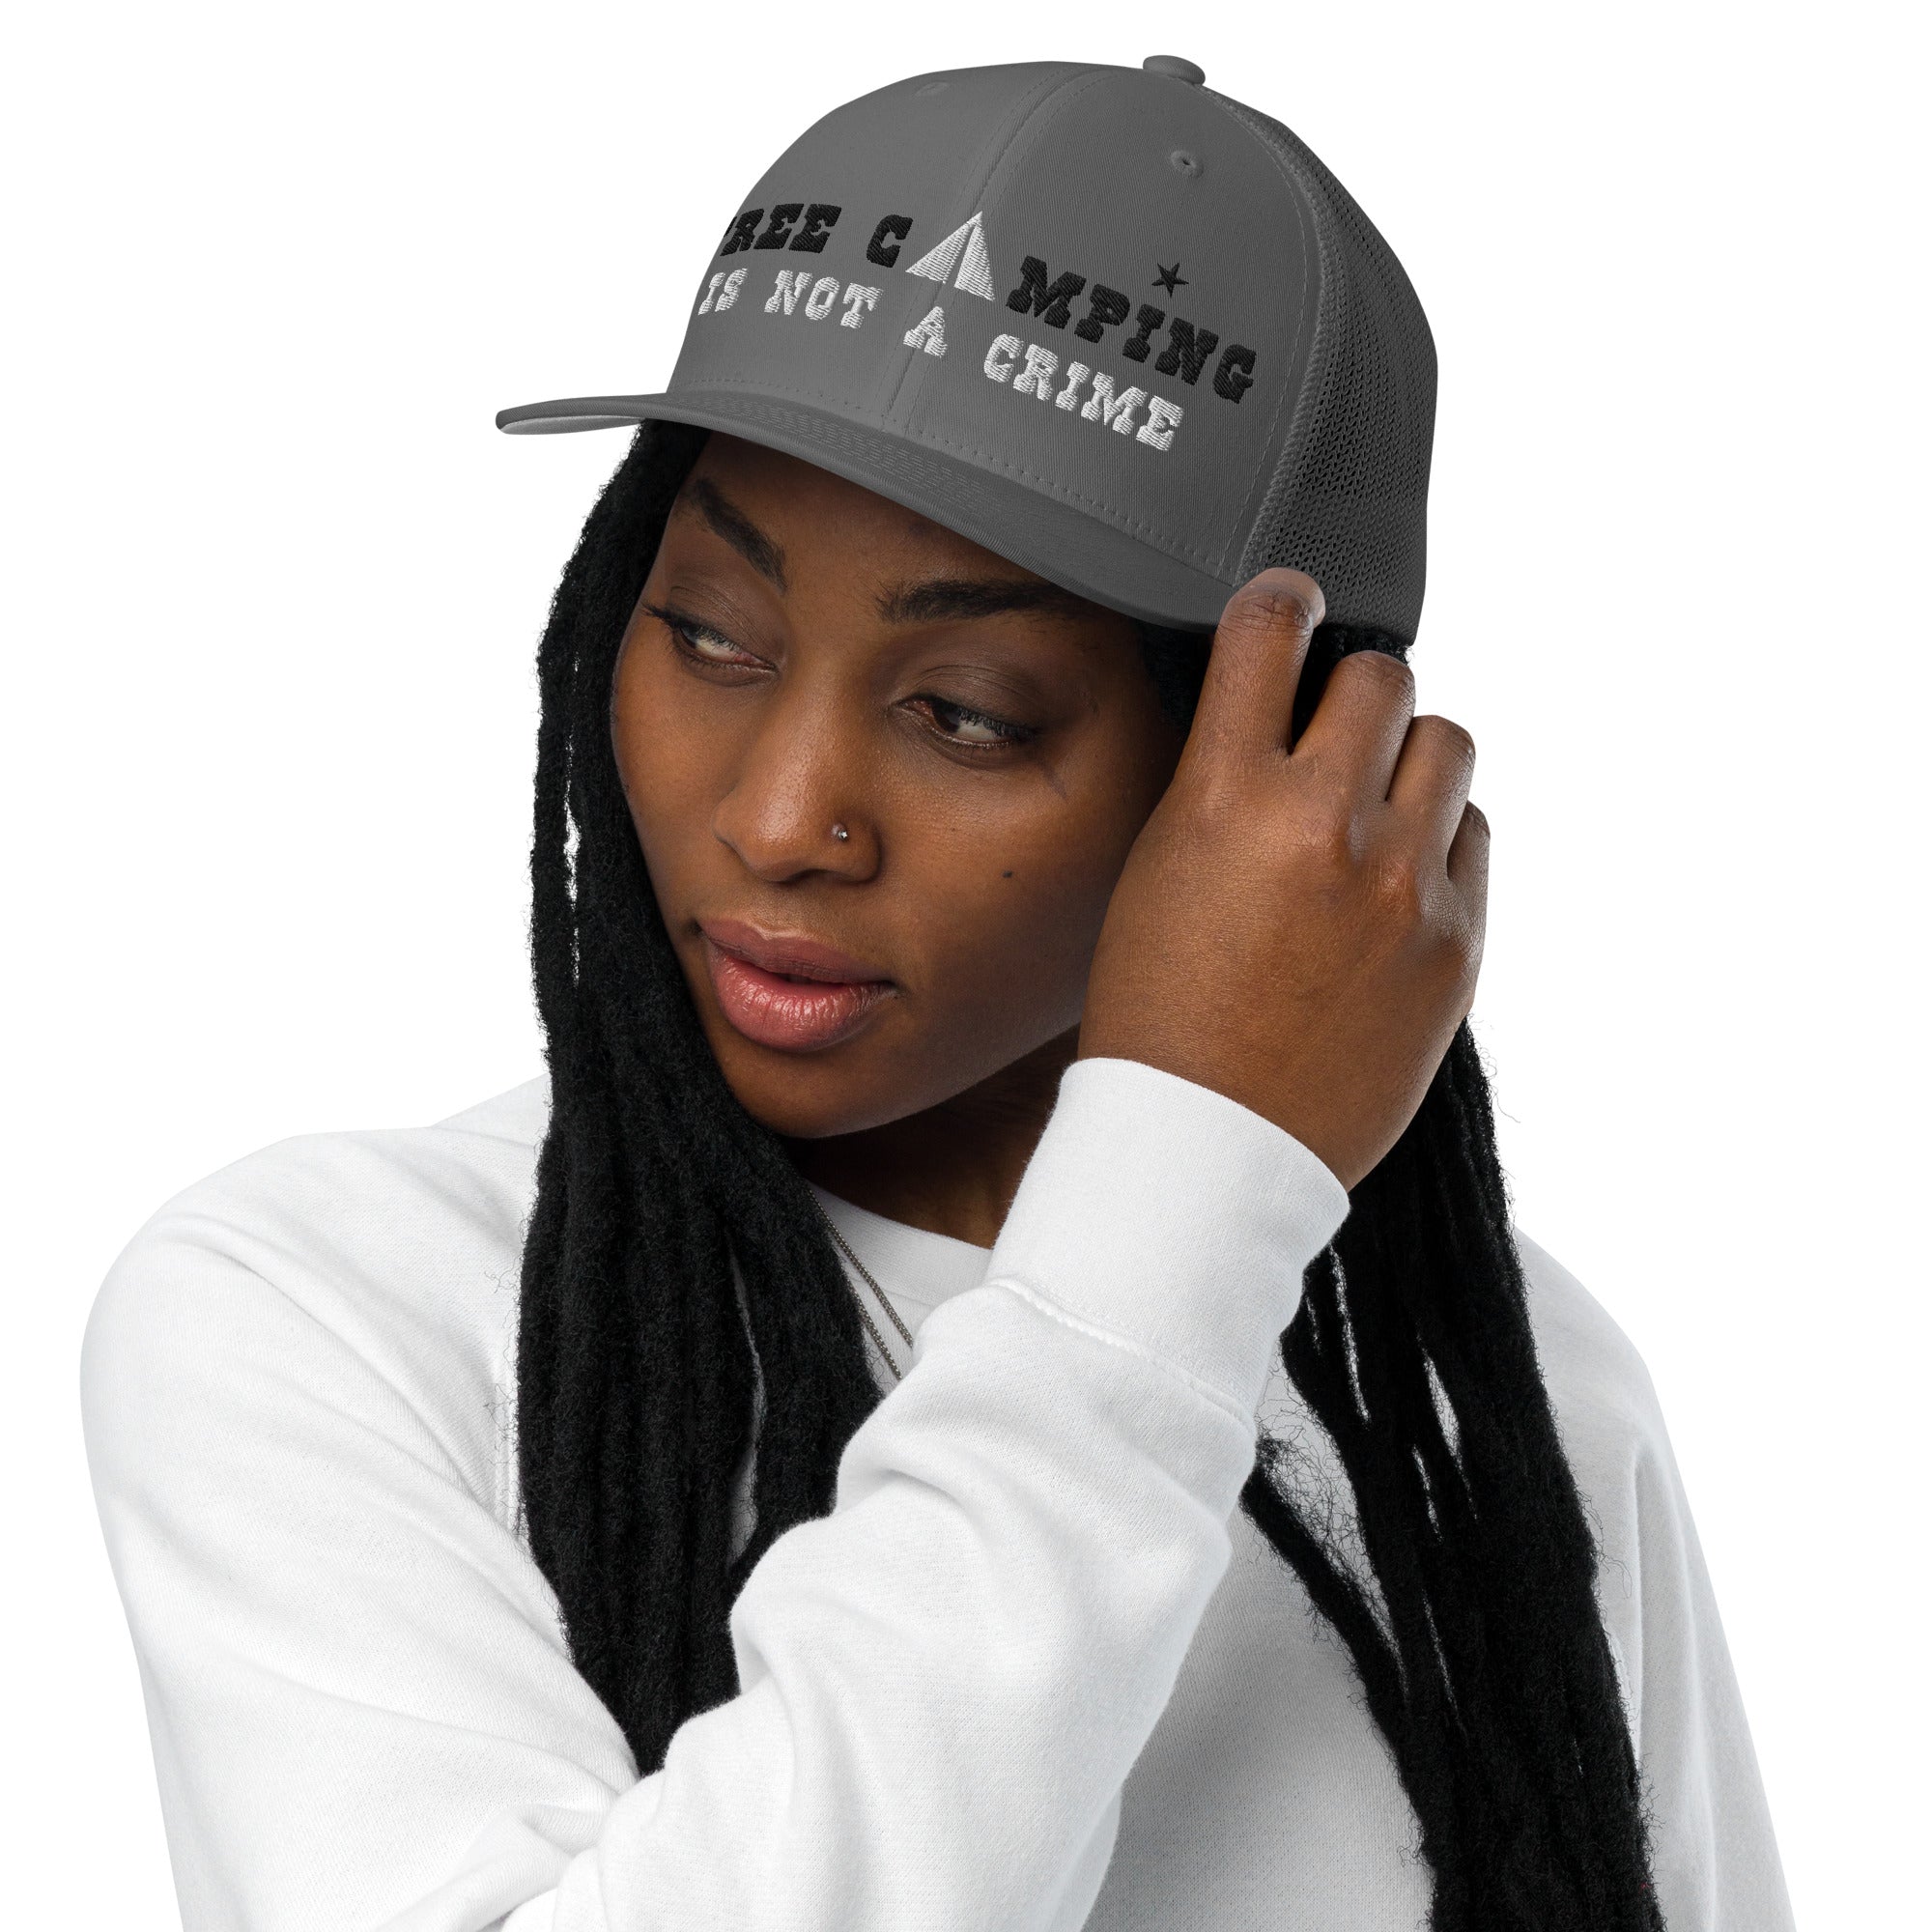 Casquette trucker renforcée Free camping is not a crime black/white